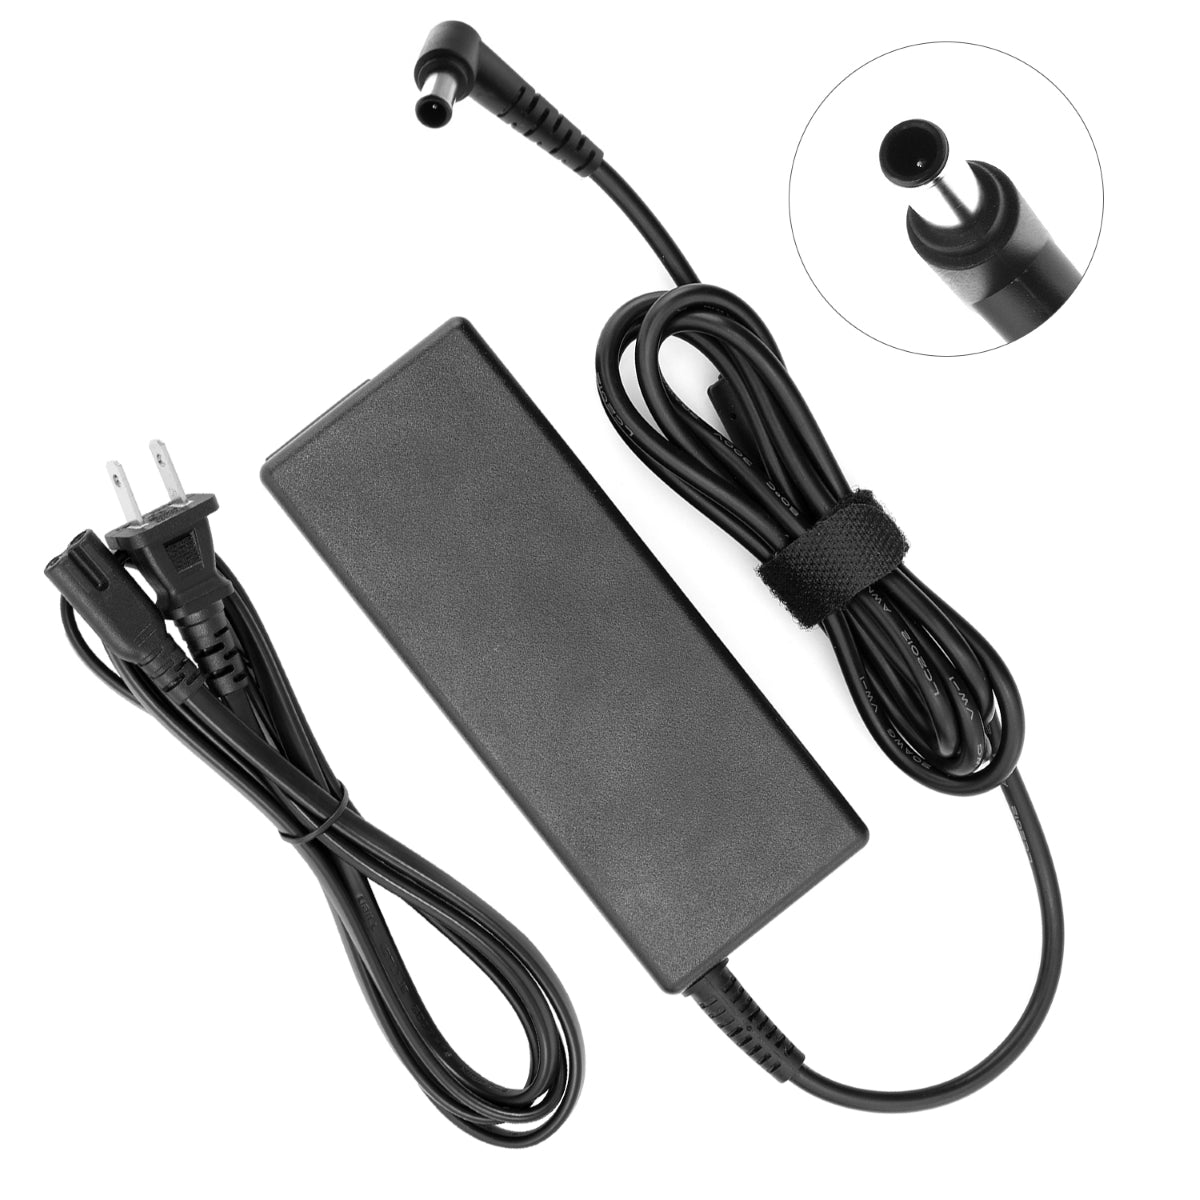 AC Adapter Power Supply for Samsung SyncMaster A3514 Monitor